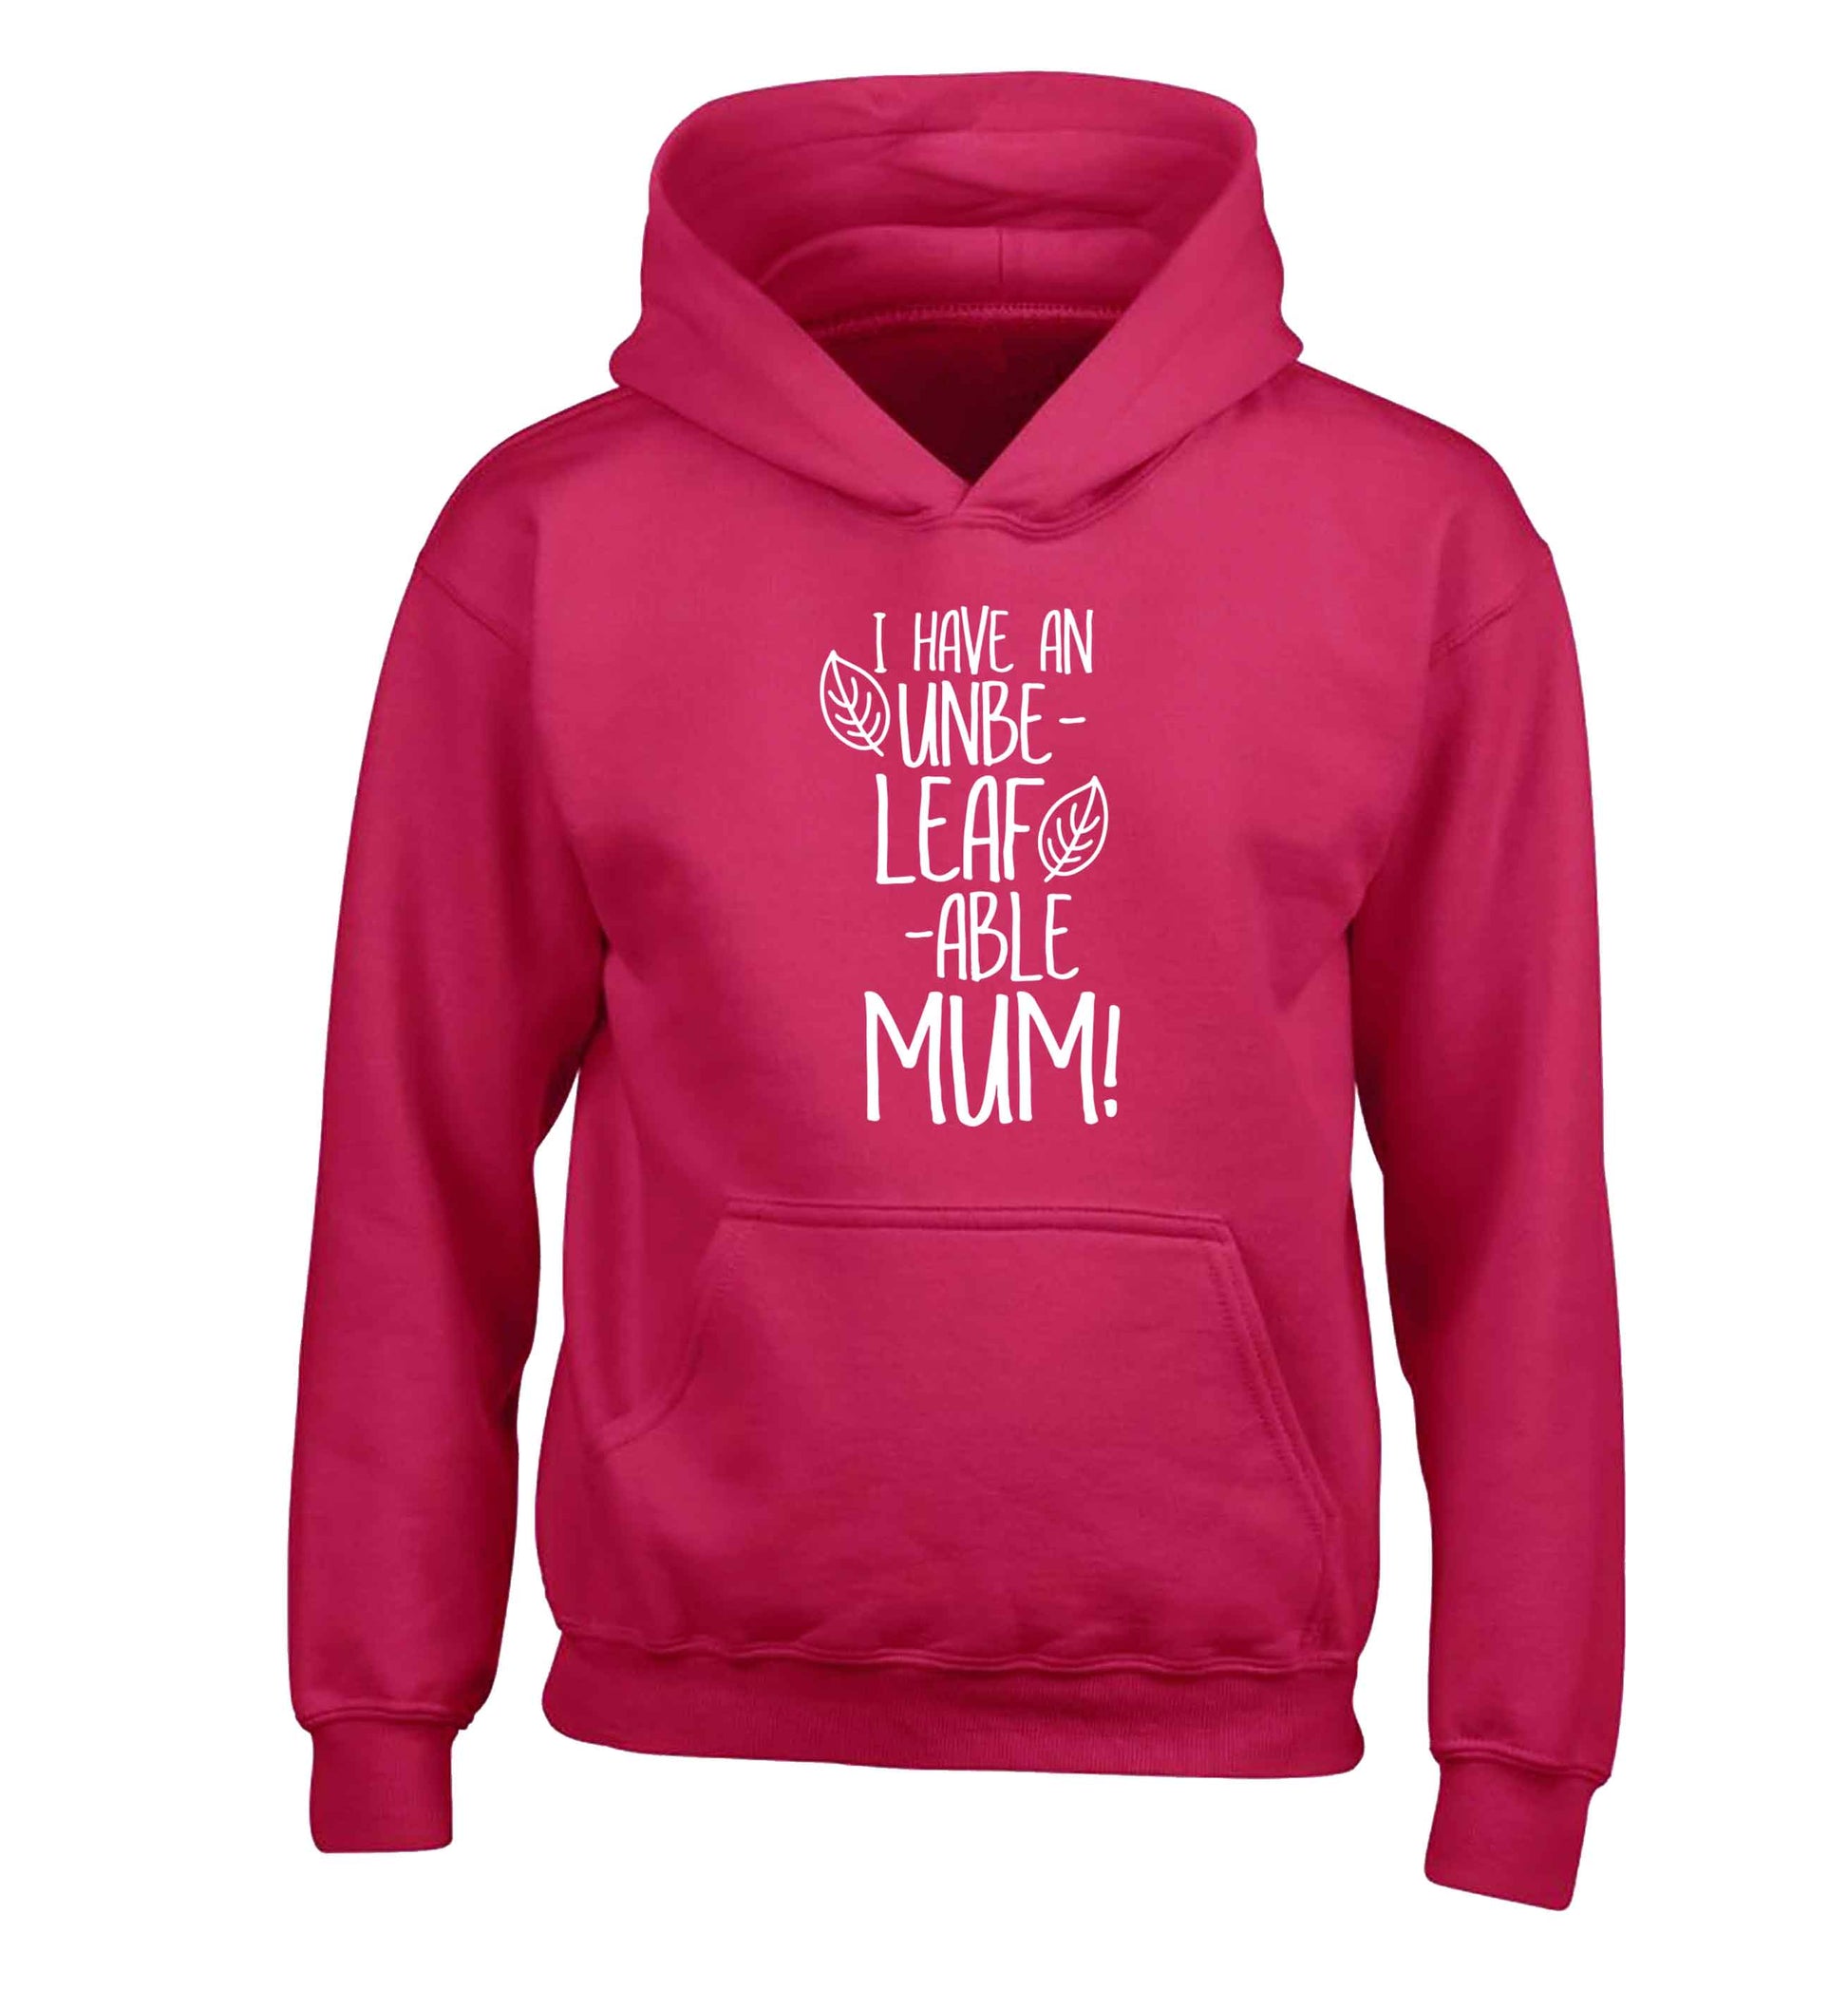 I have an unbeleafable mum! children's pink hoodie 12-13 Years